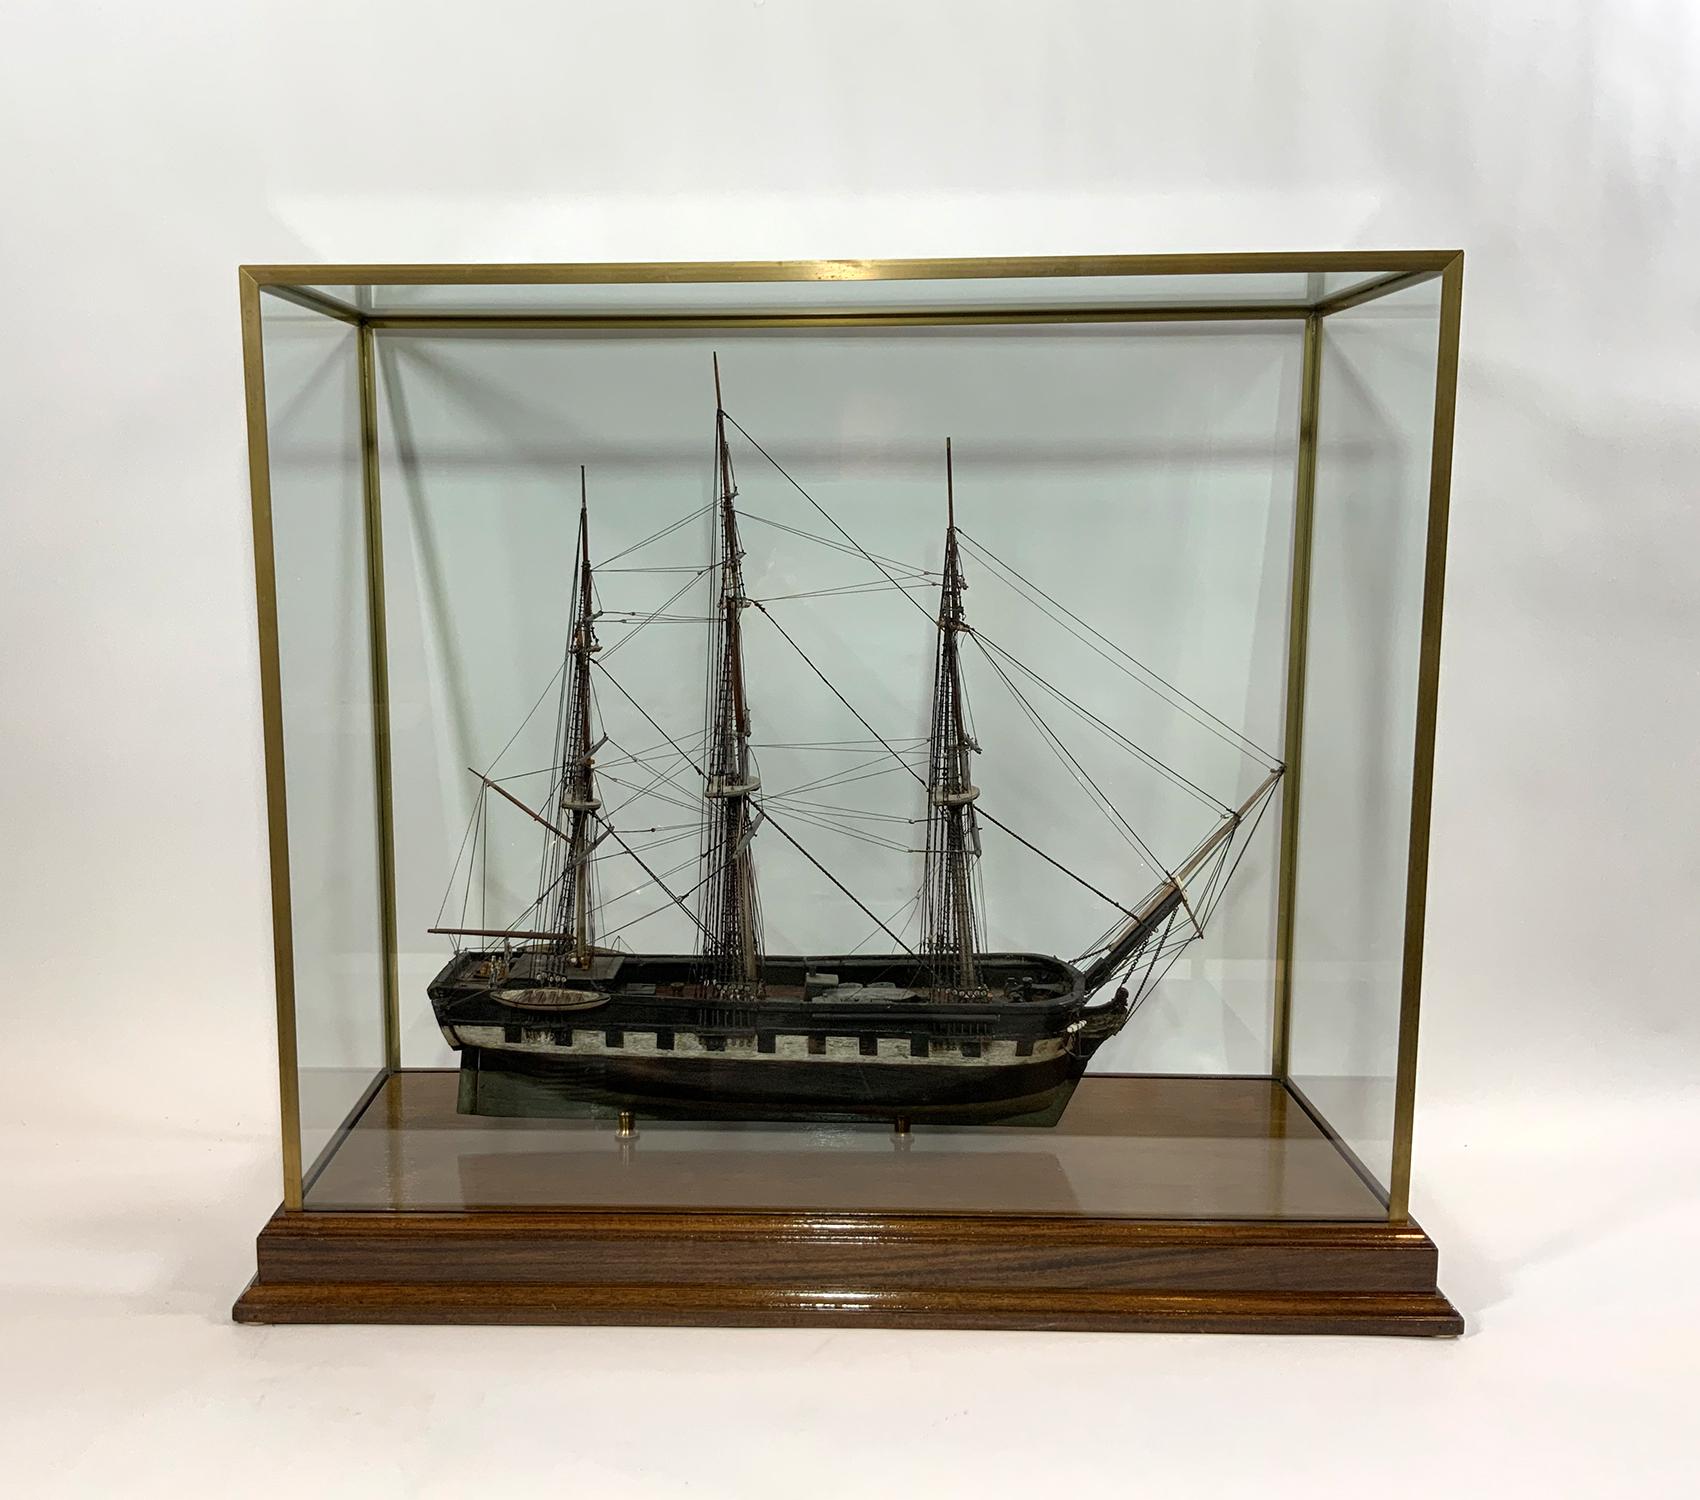 This is a well-preserved model dating to the early 1900’s. in original paint. Vessel name is painted on the stern. Fully rigged with all appropriate cords. Mounted into a custom display case.

Weight: 41 LBS
Overall Dimensions: 28” H x 33